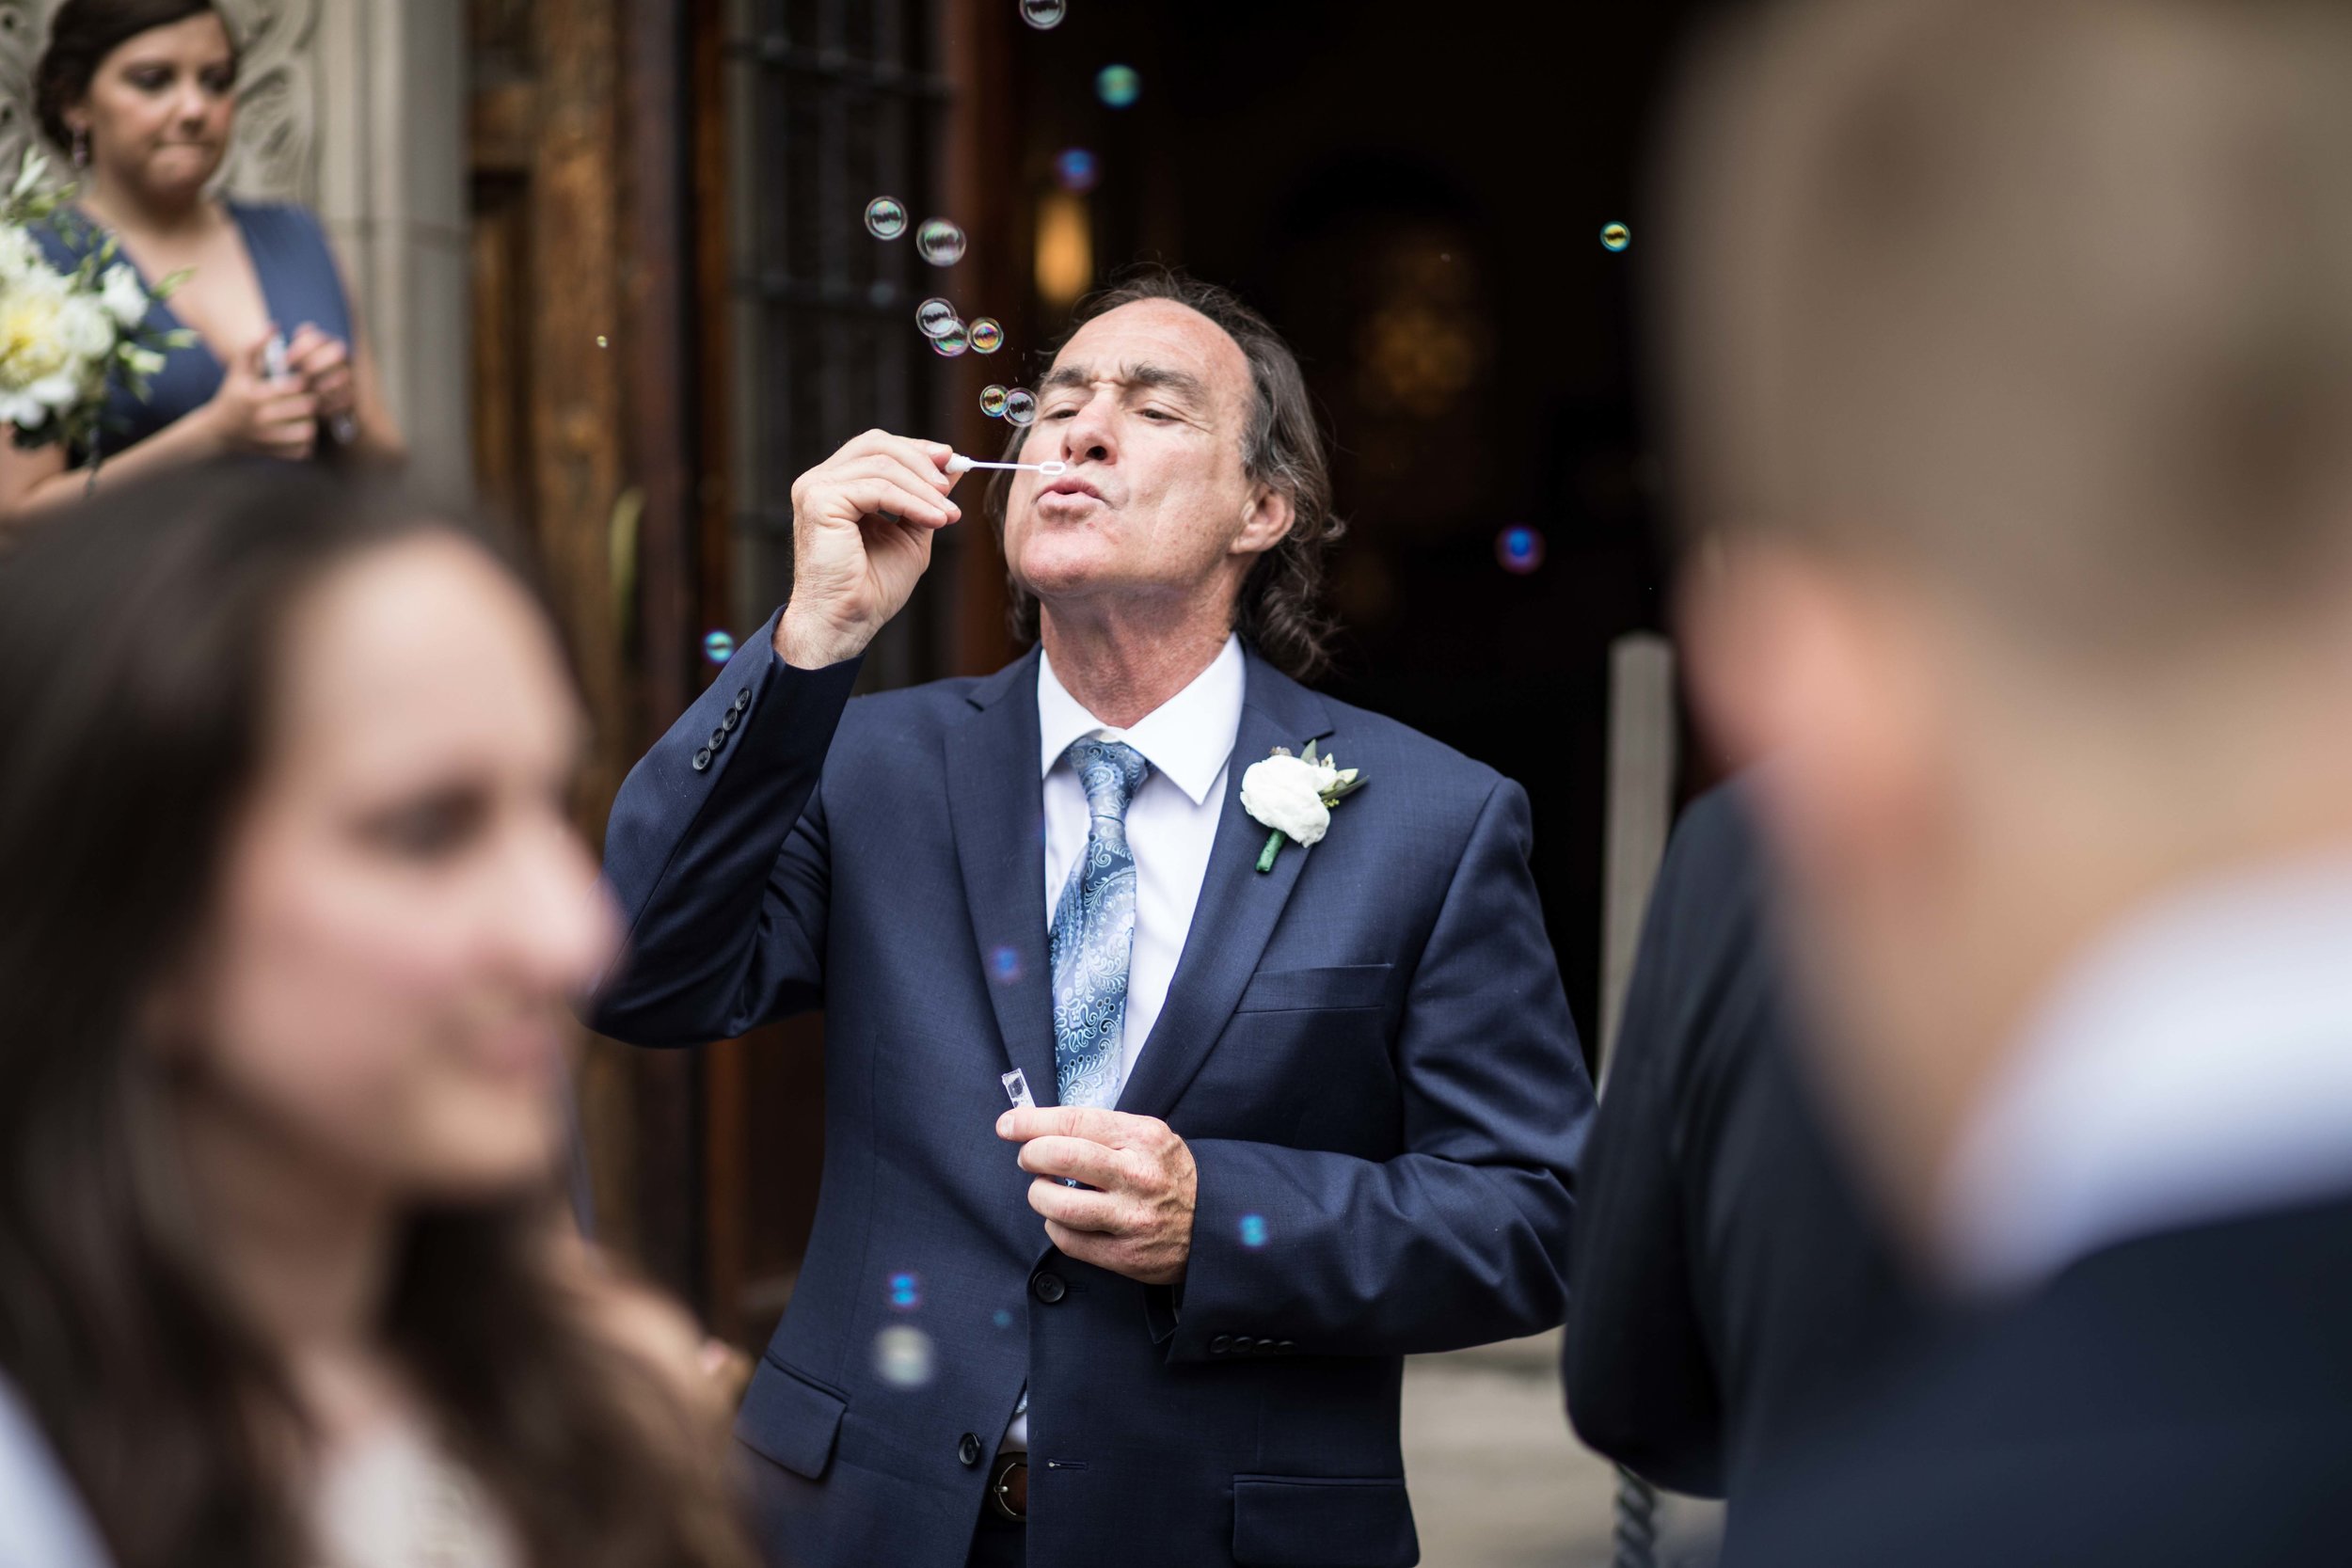  Father of the Groom testing bubble wand  